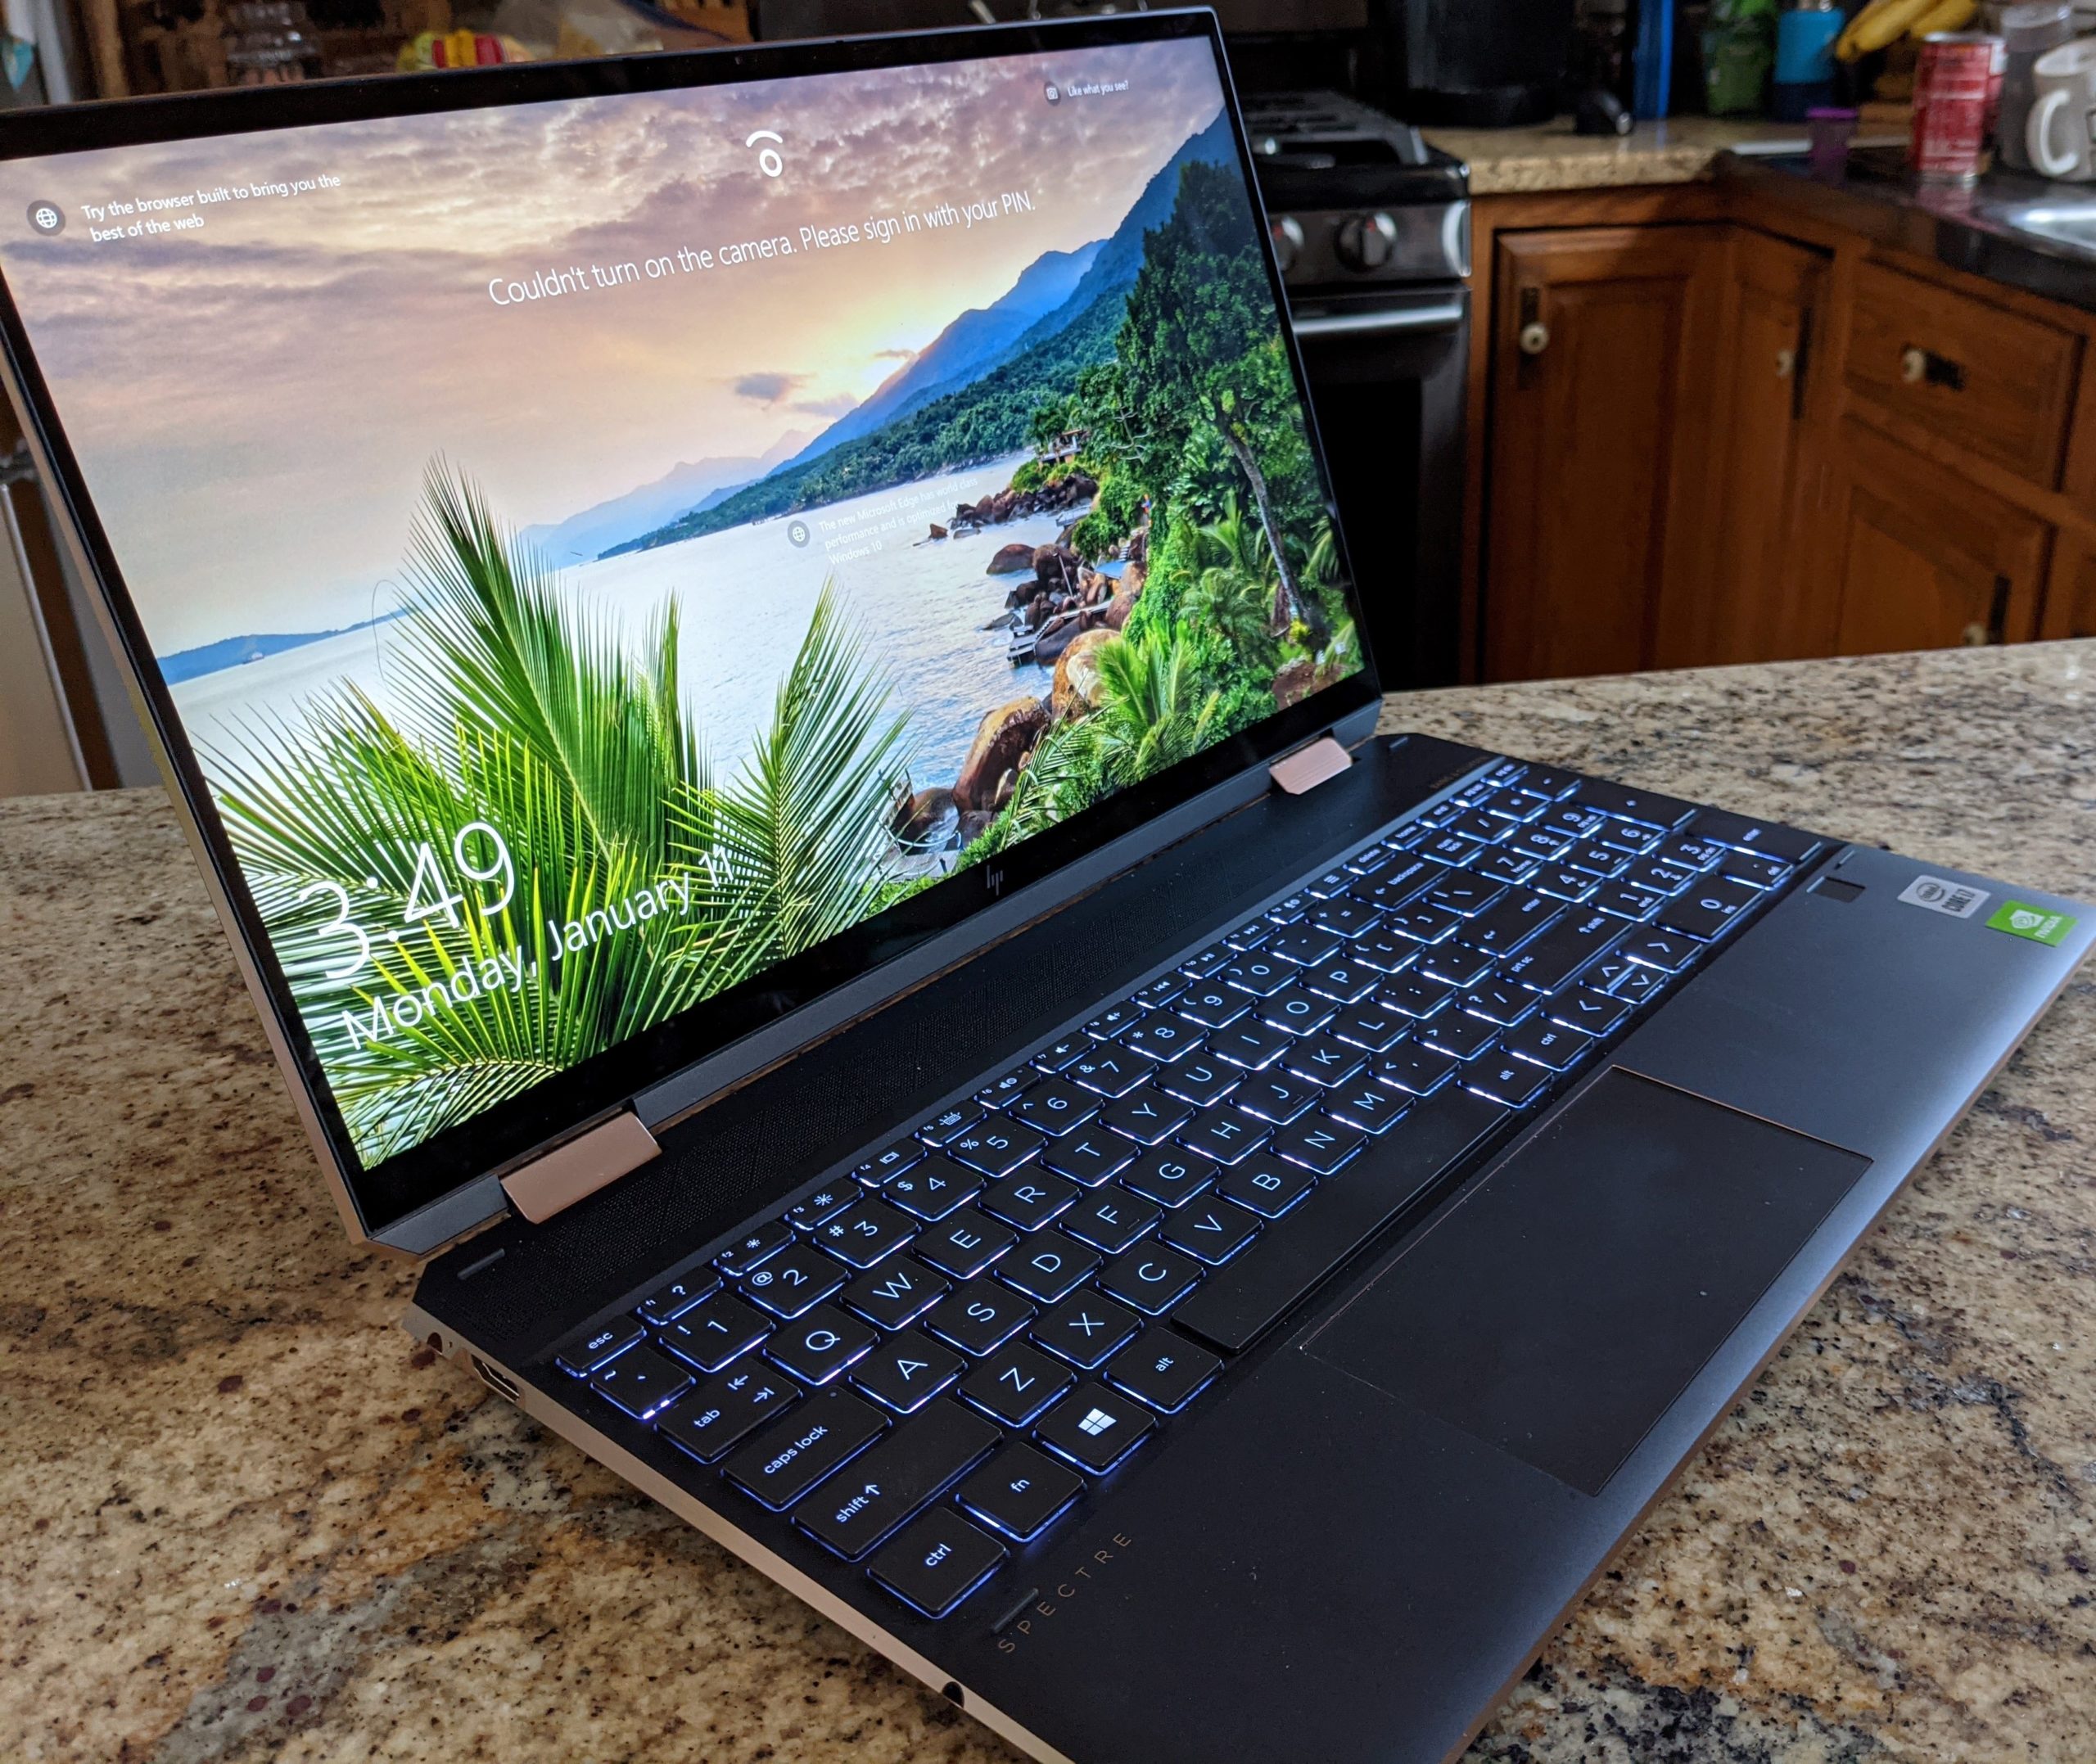 Saving stacks without stacking: My experience buying a Best Buy open box  laptop